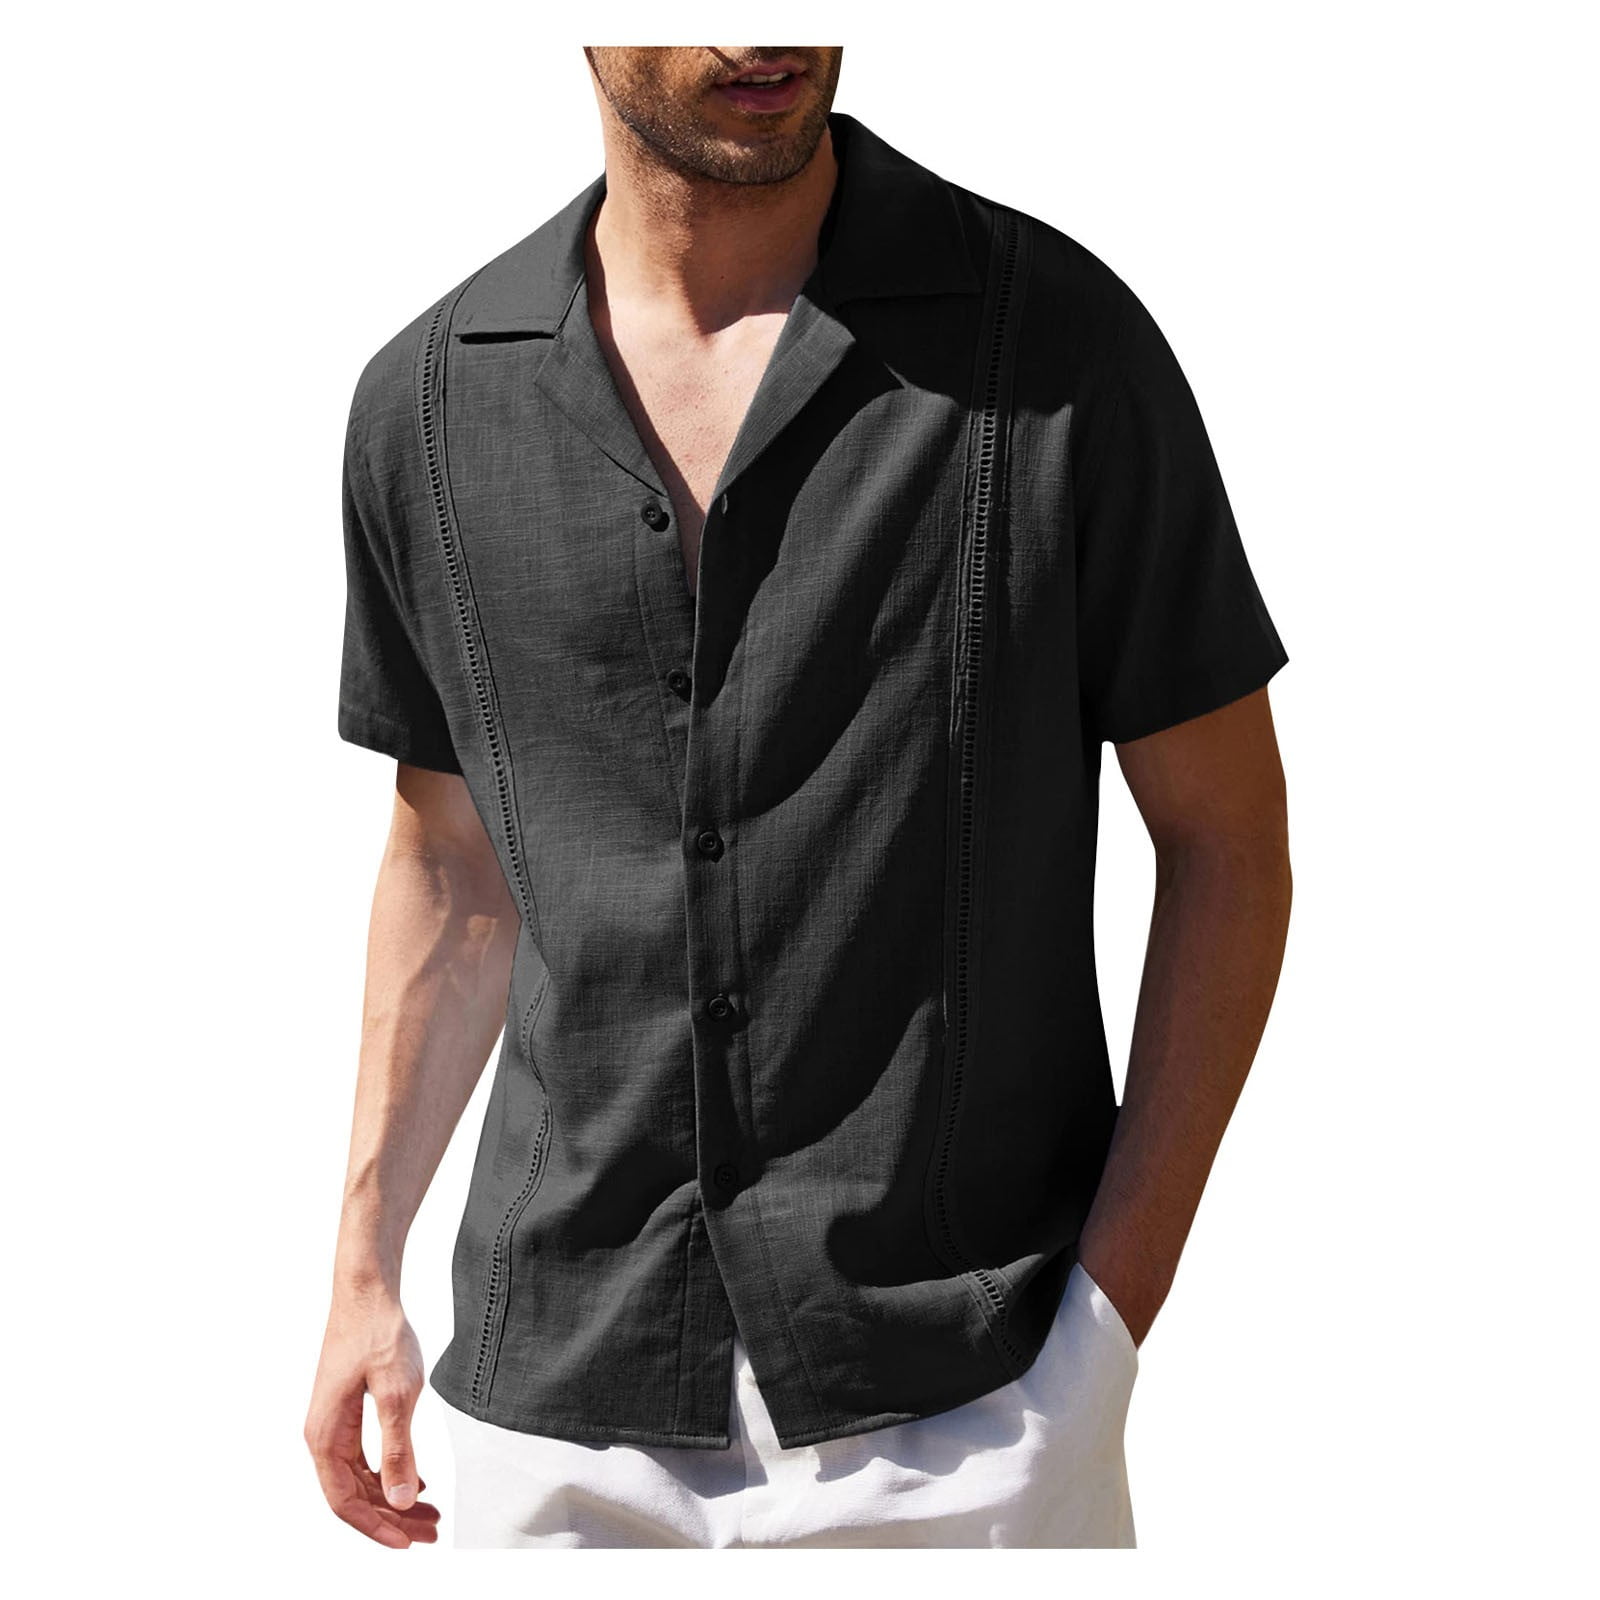 Male Summer Casual Top Shirt Embroidery Edge Solid Shirts Short